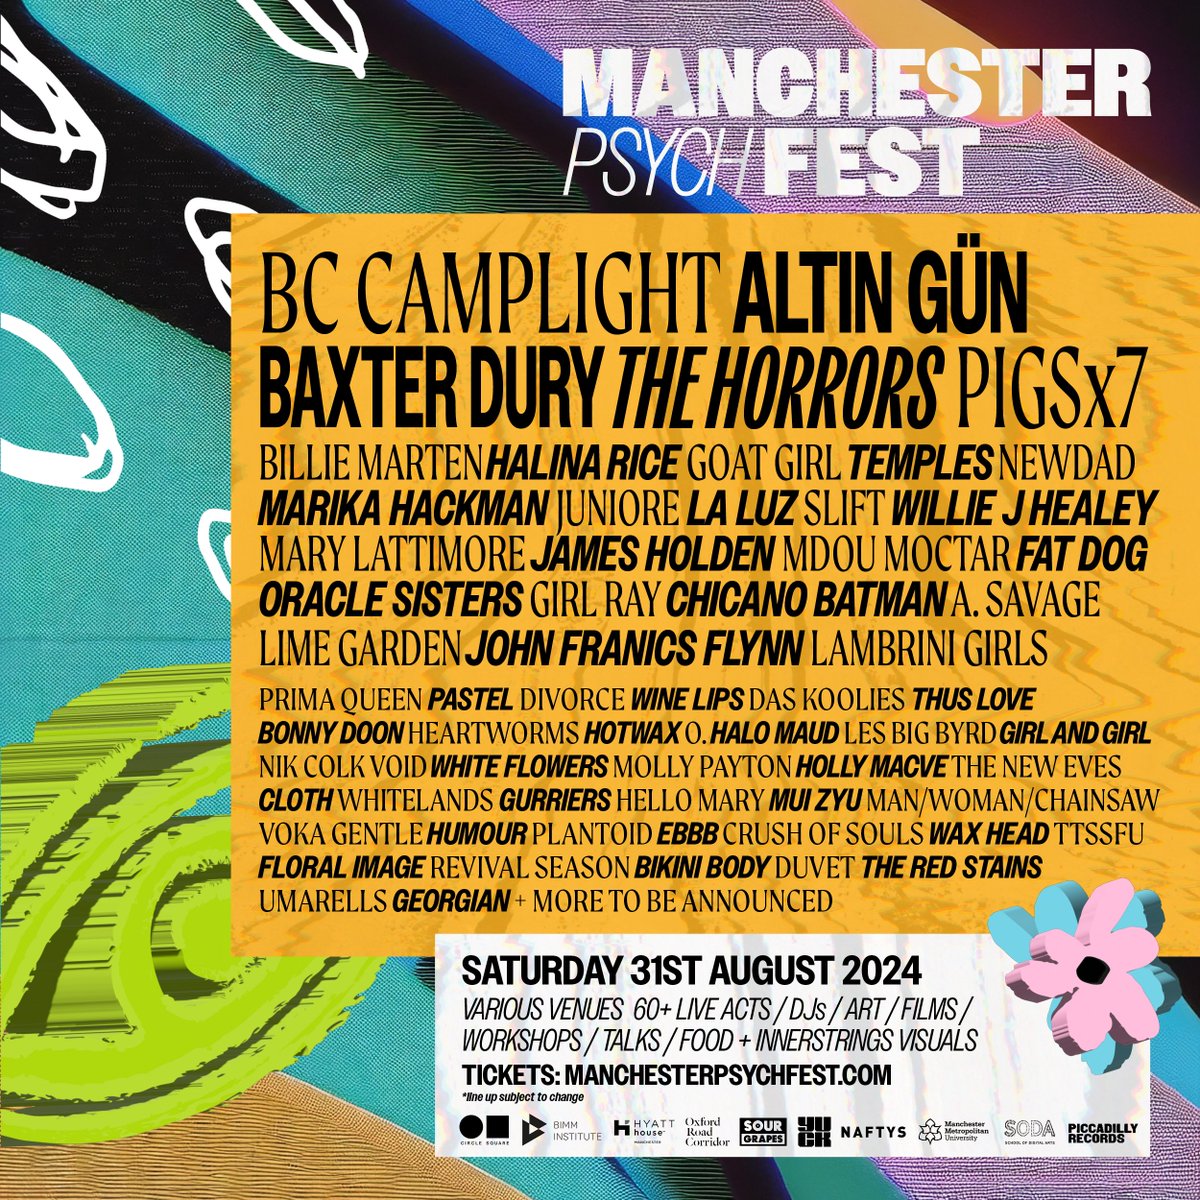 Manchester Psych Festival have unveiled their the next wave of acts for this years festival including @bccamplight, @altingunband, @BillieMarten, Halina Rice, @MarikaHackman La Luz and more. Tickets available here -> manchesterpsychfest.com